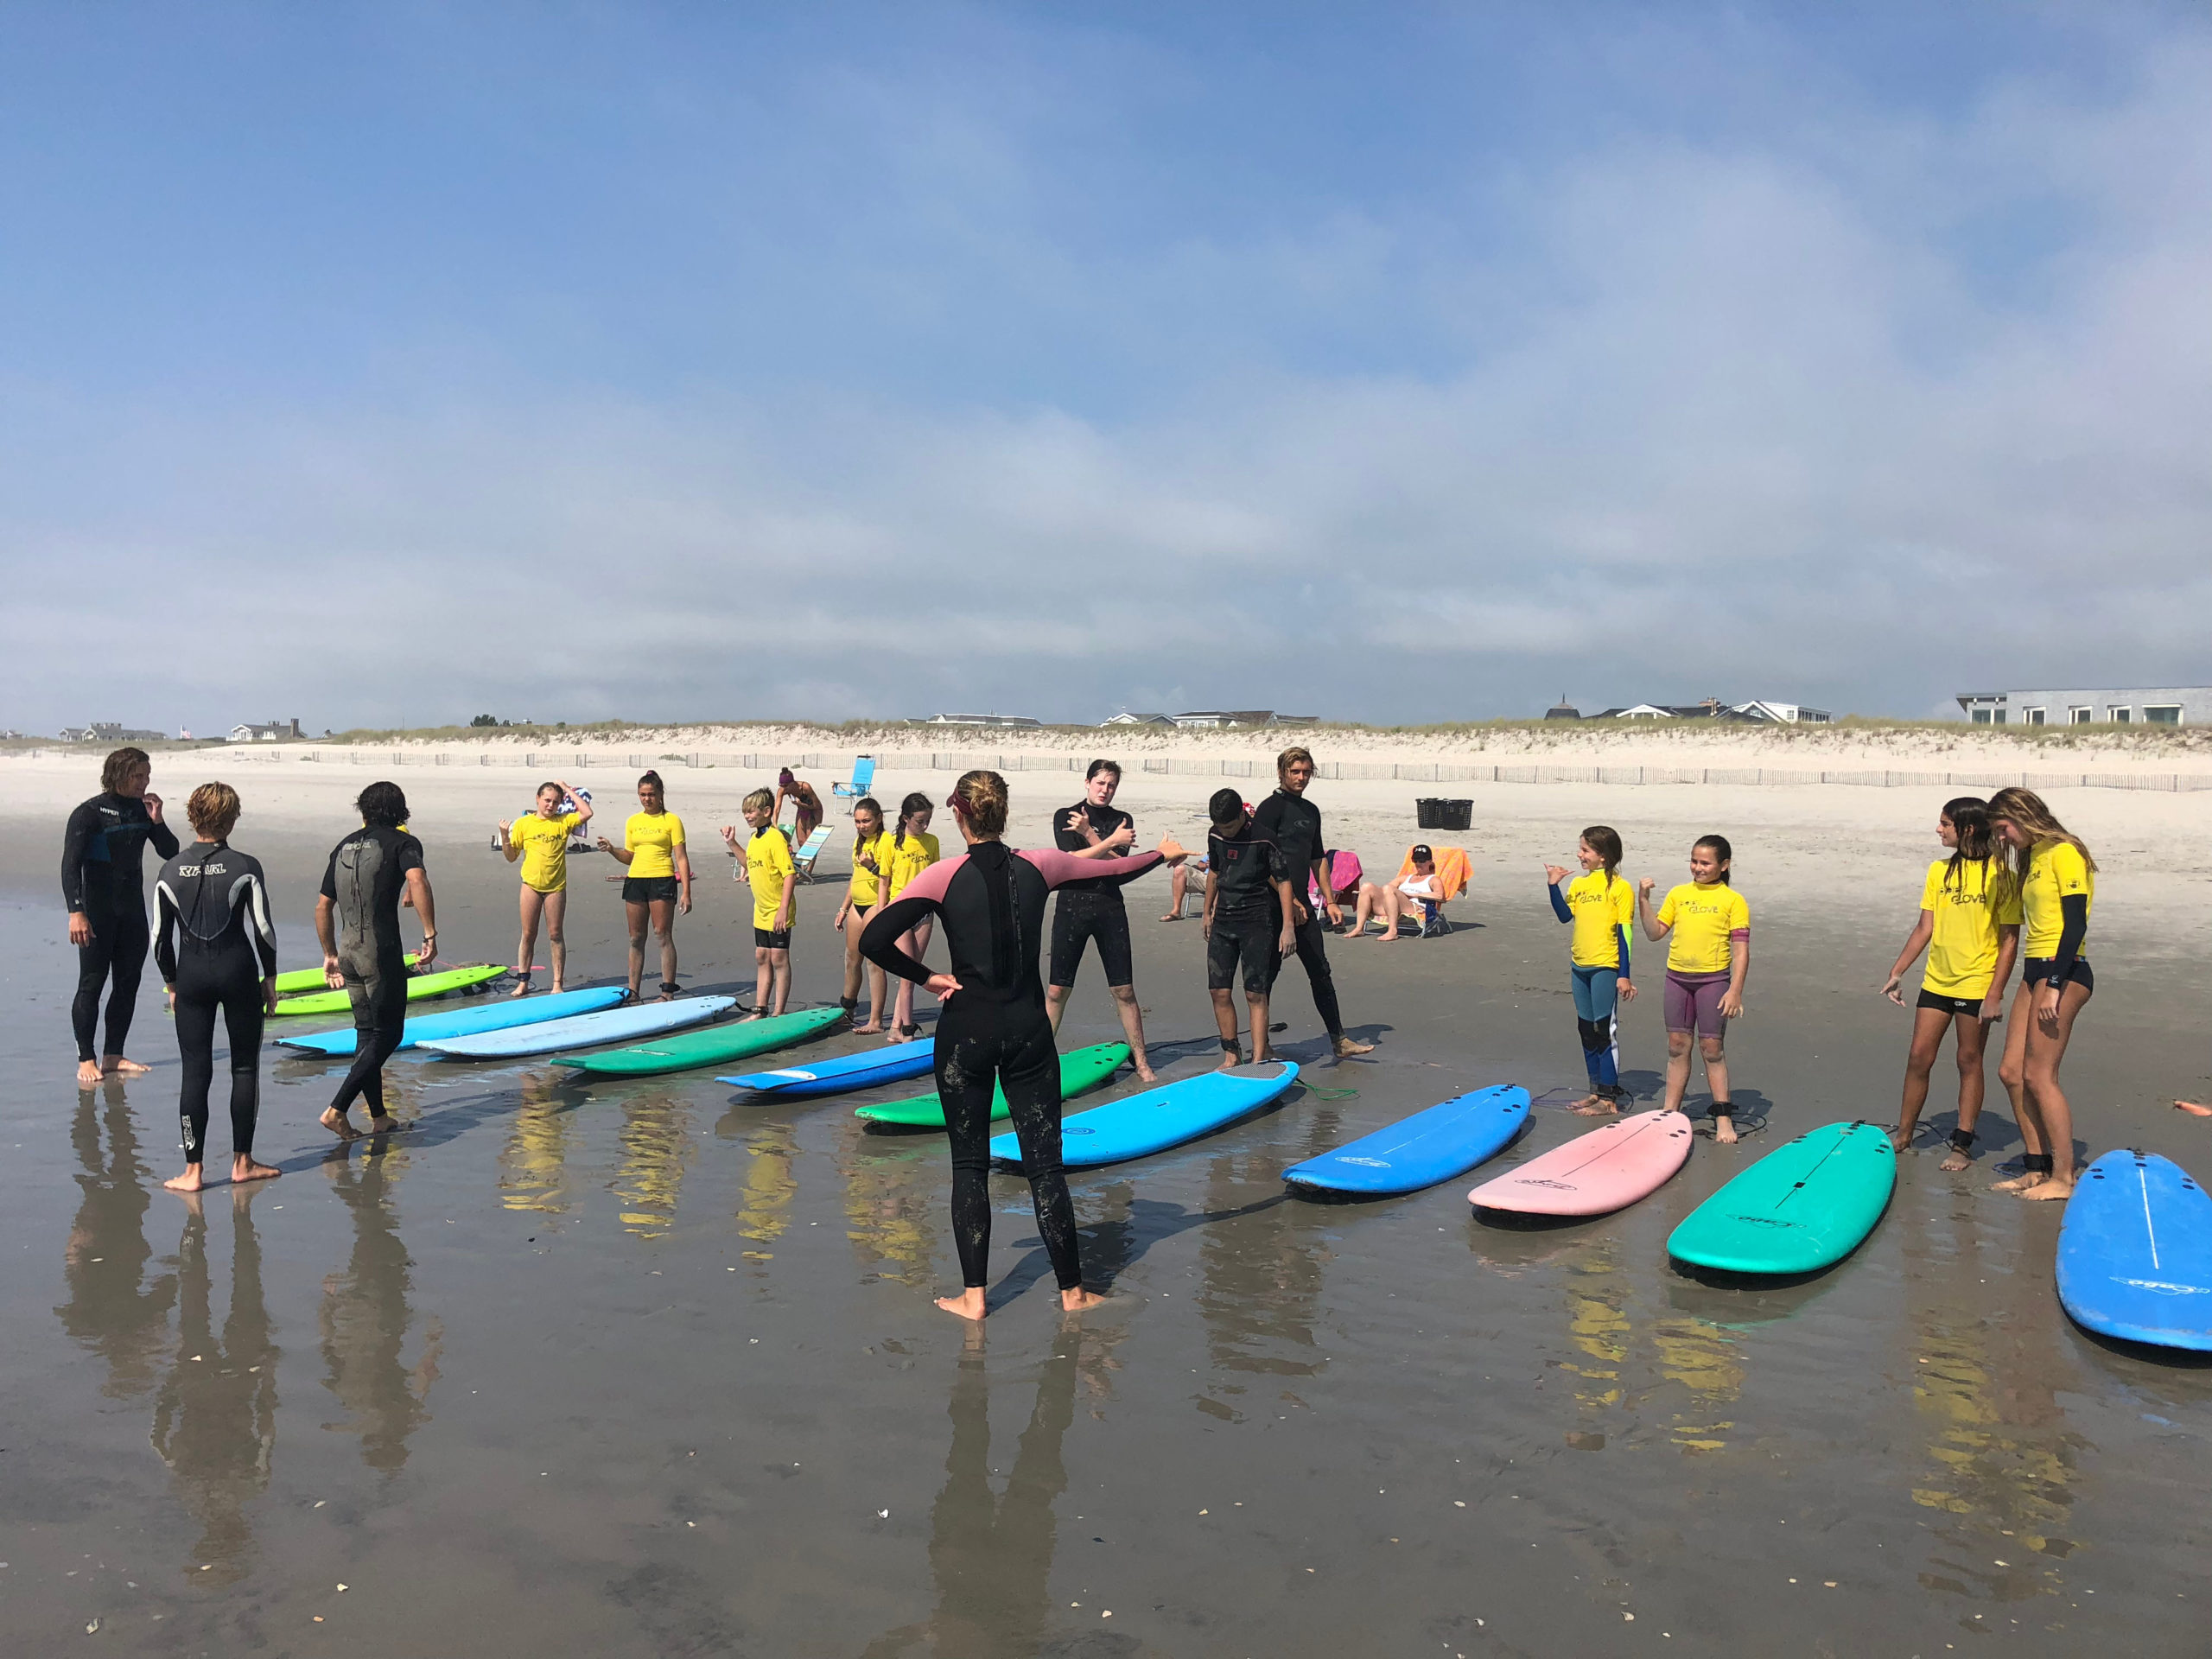 60 Min Group Lessons – Surfers: 8 Min – 20 Max